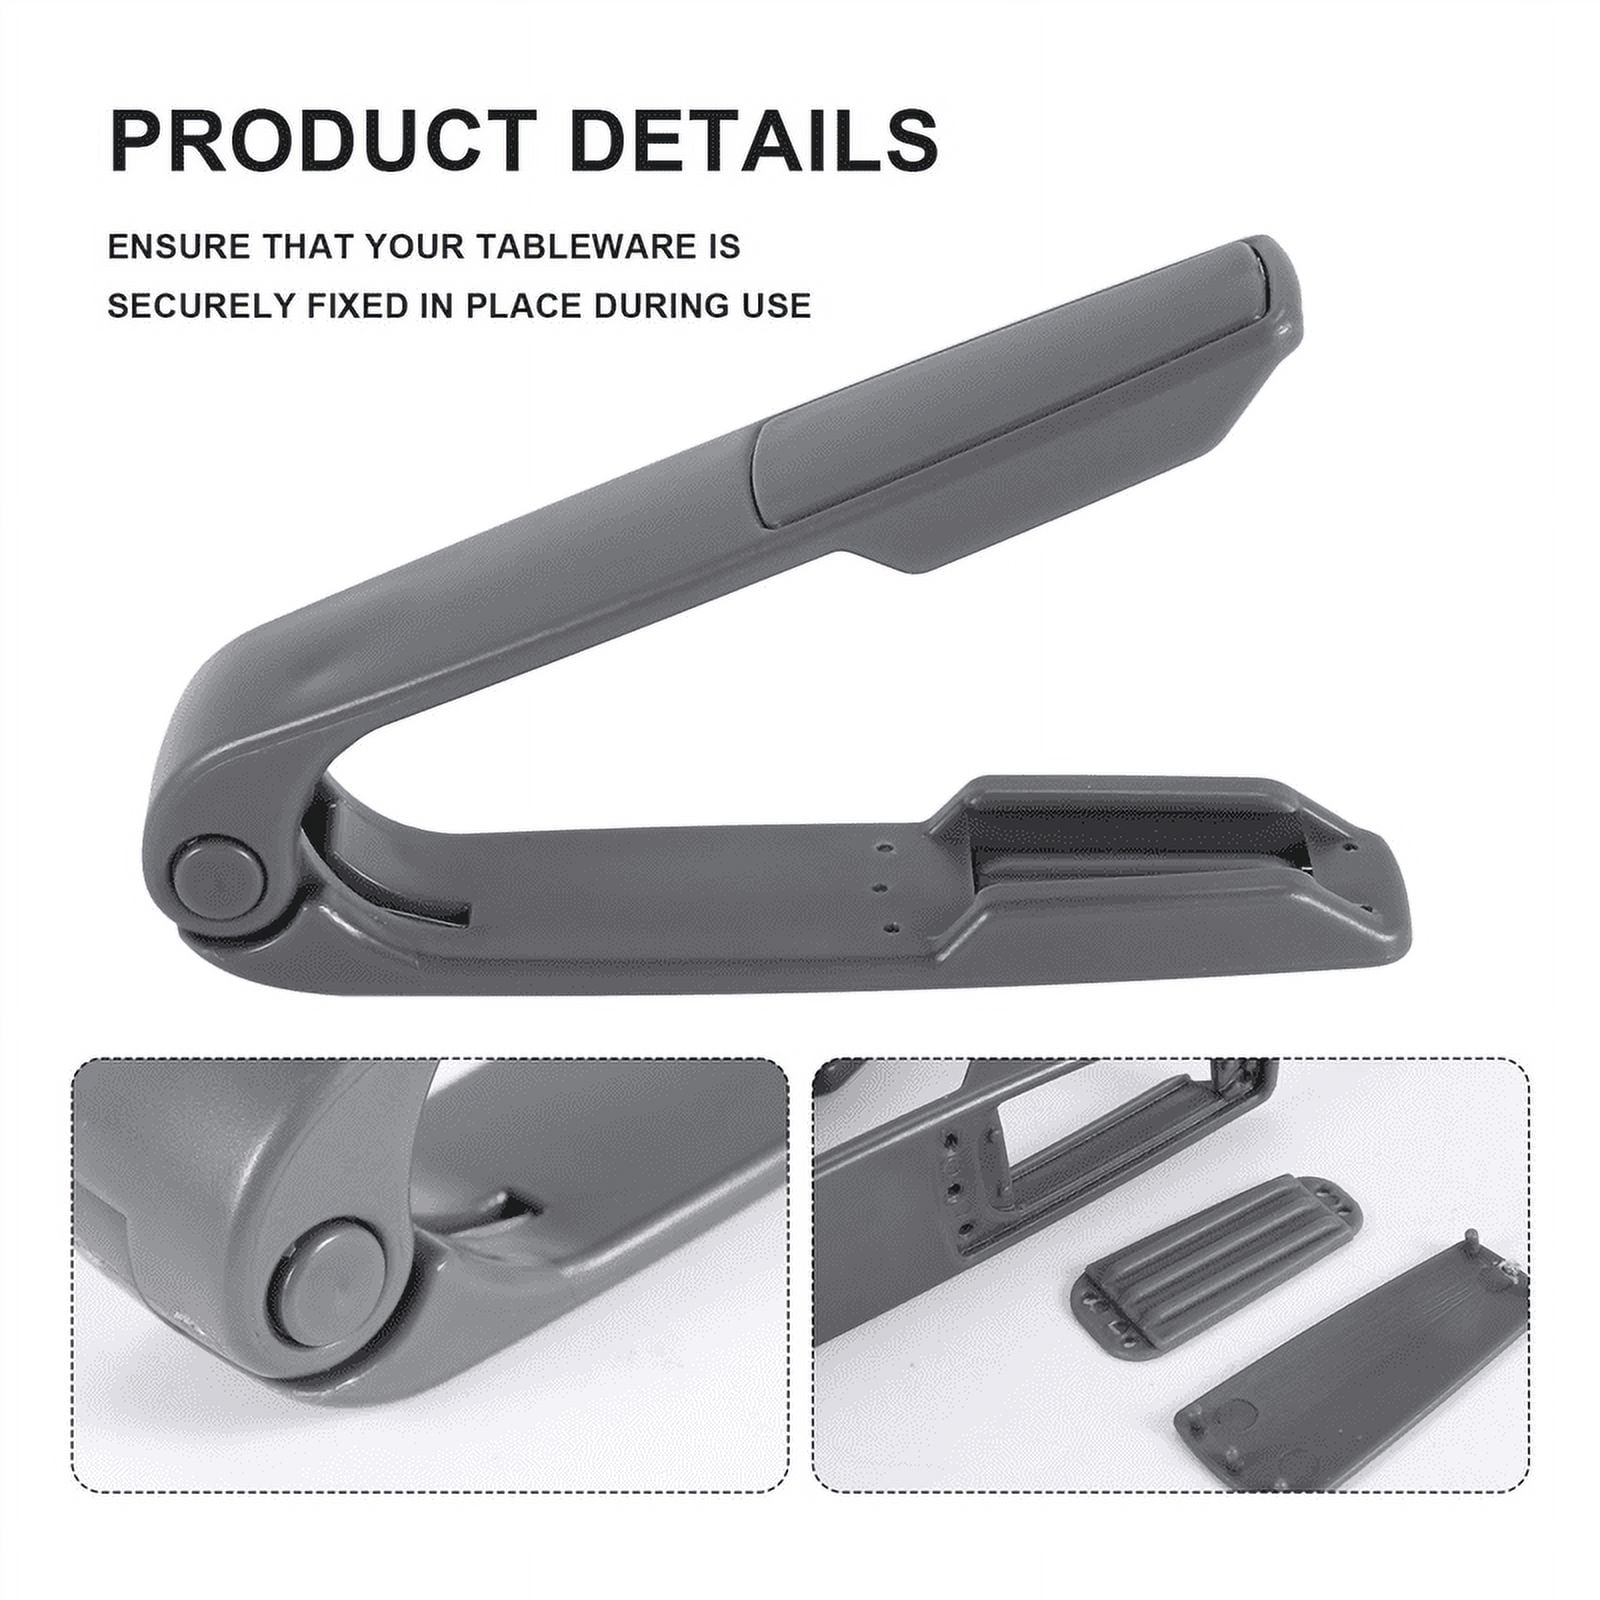 Verpetridure Any Tongs, Any Tableware, Become Kitchen Tongs, Dinner Clips, Kitchen Clips, Size: One size, Gray